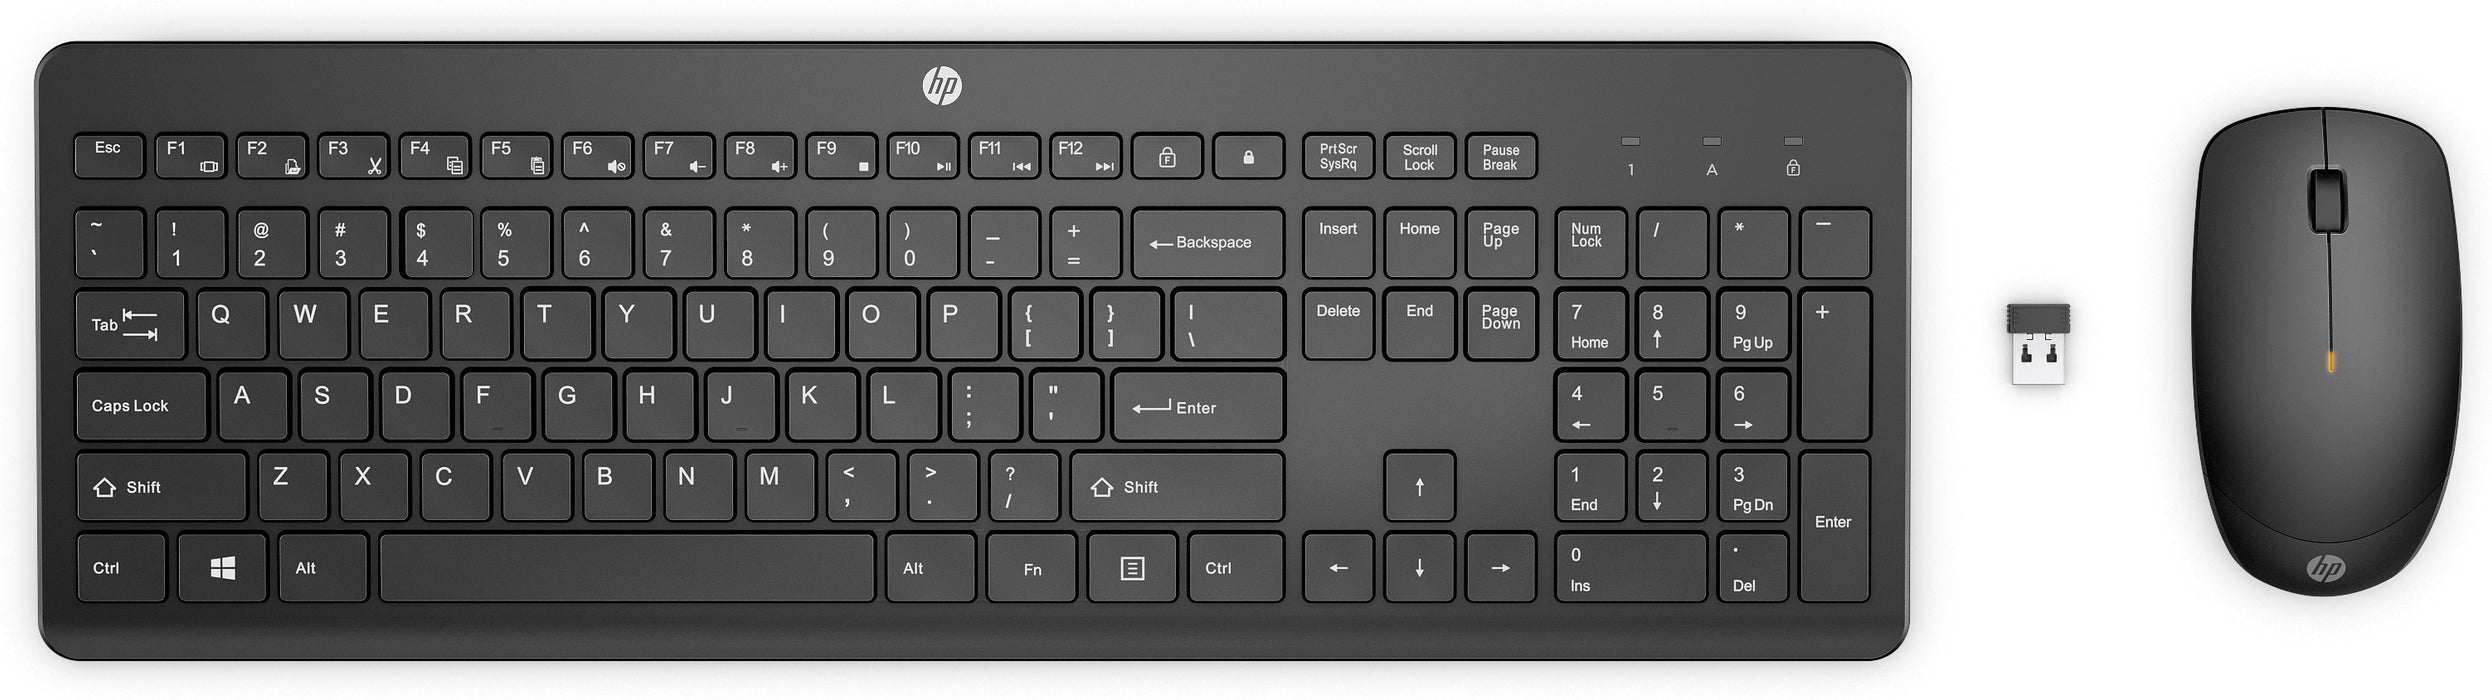 HP 235 Wireless Mouse and Keyboard Combo, Full-size (100%), RF Wireless, Black, Mouse included